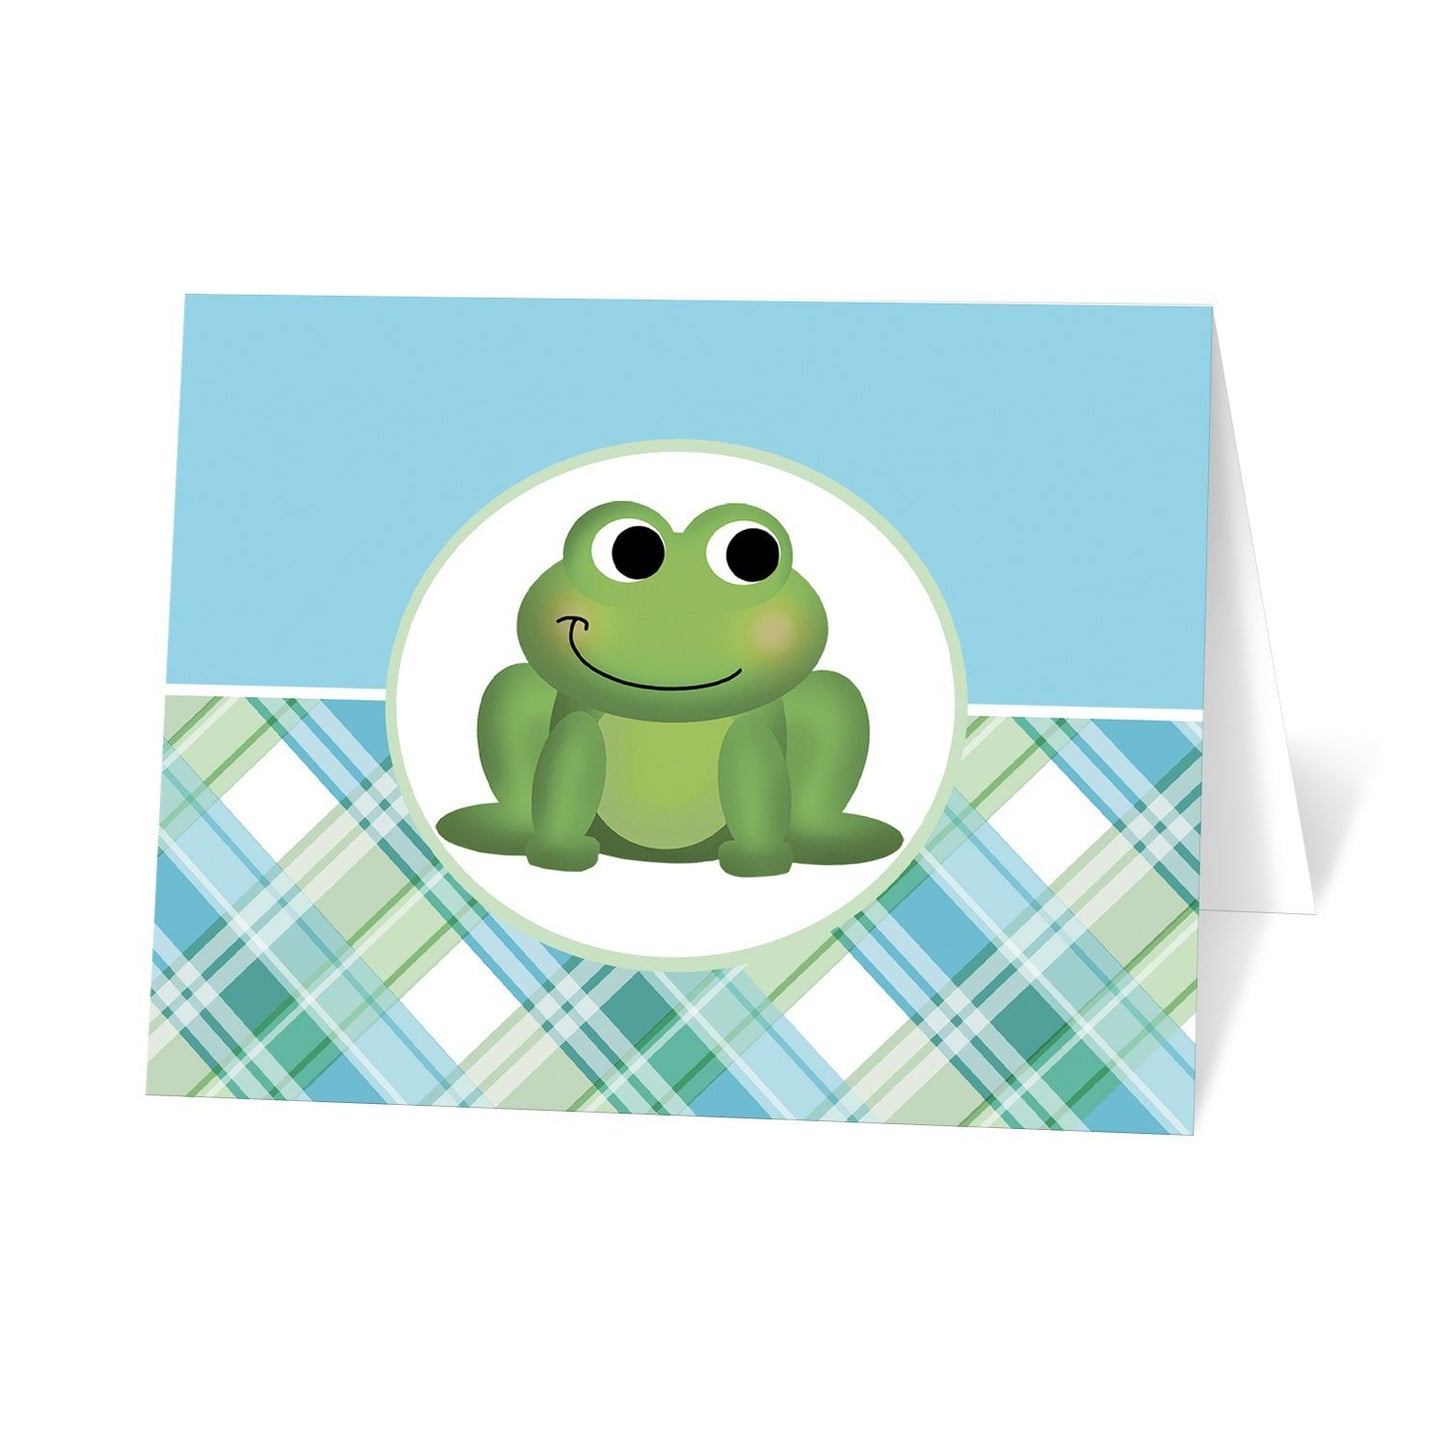 Frog Note Cards - Cute Frog Green and Blue Plaid Note Cards at Artistically Invited